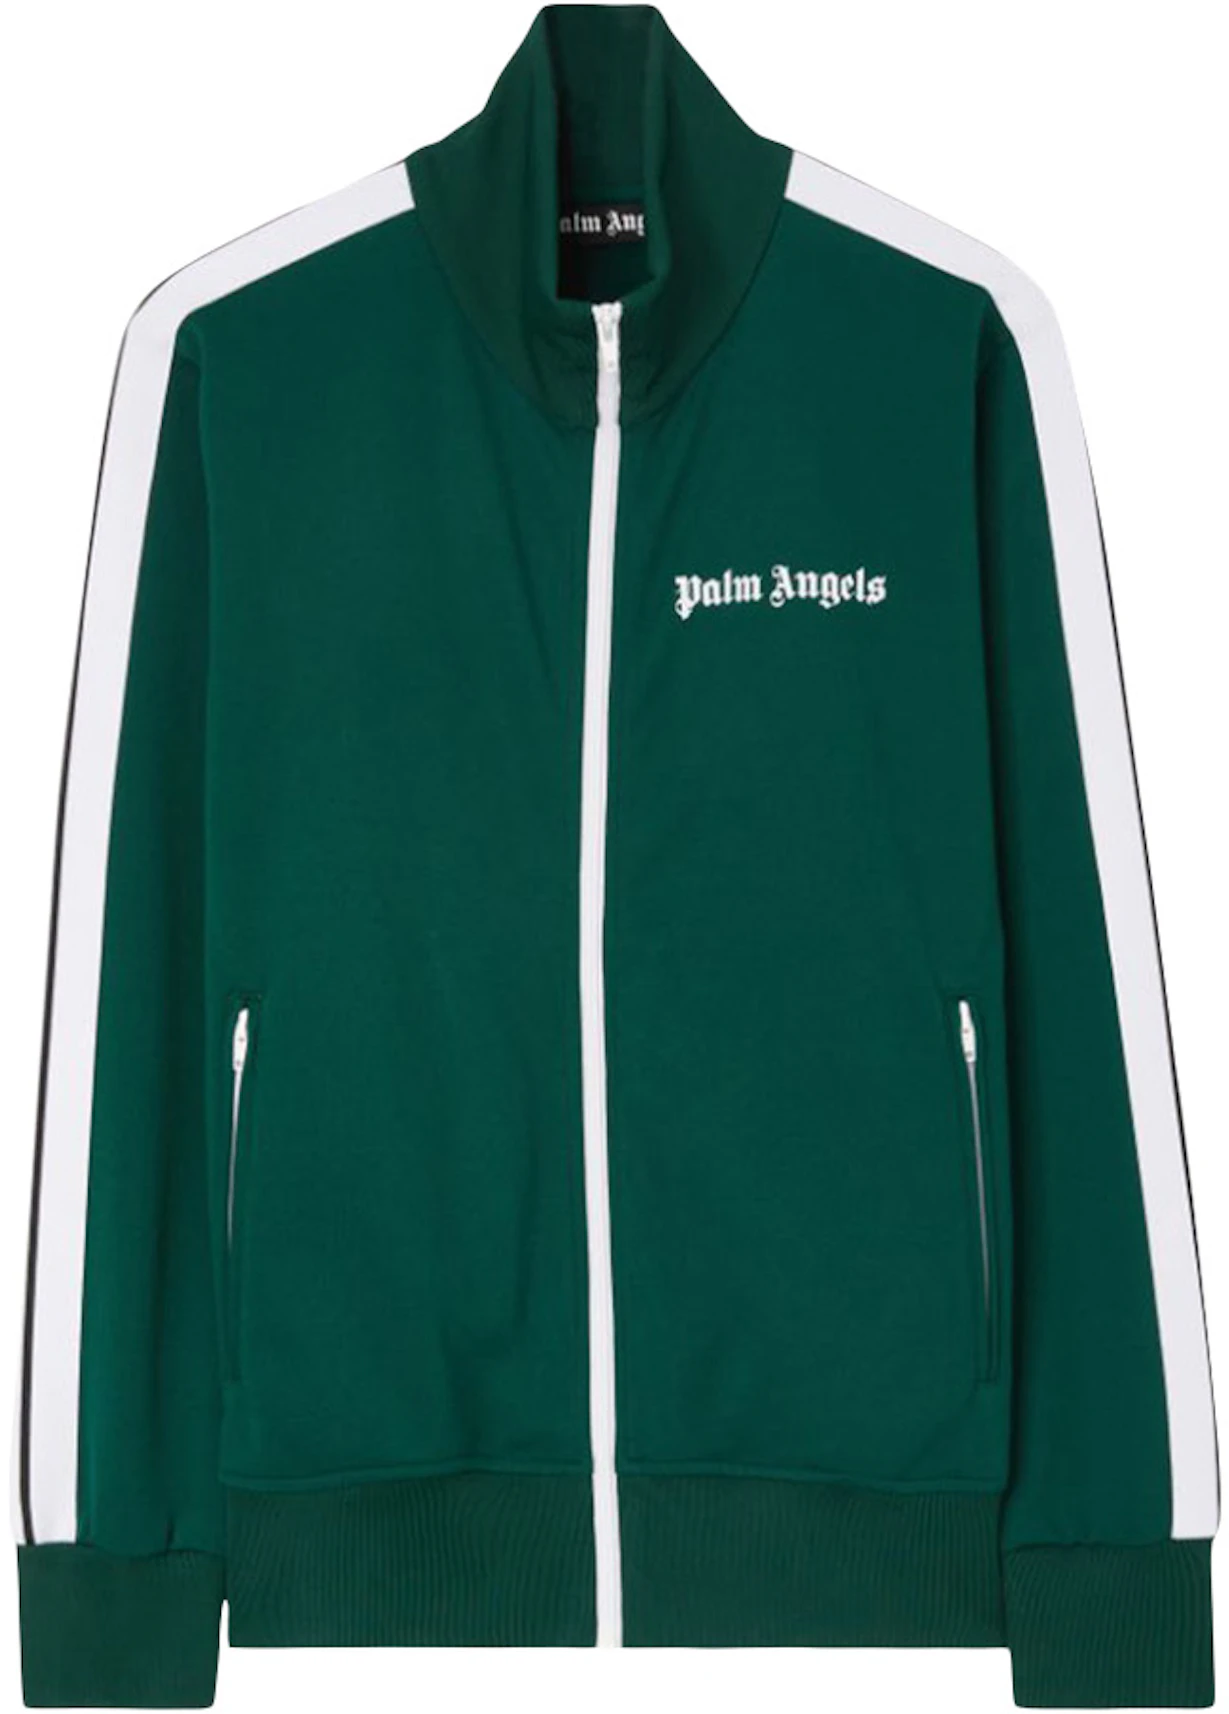 Palm Angels Classic Track Jacket 5501 Green/White - FW22 - US